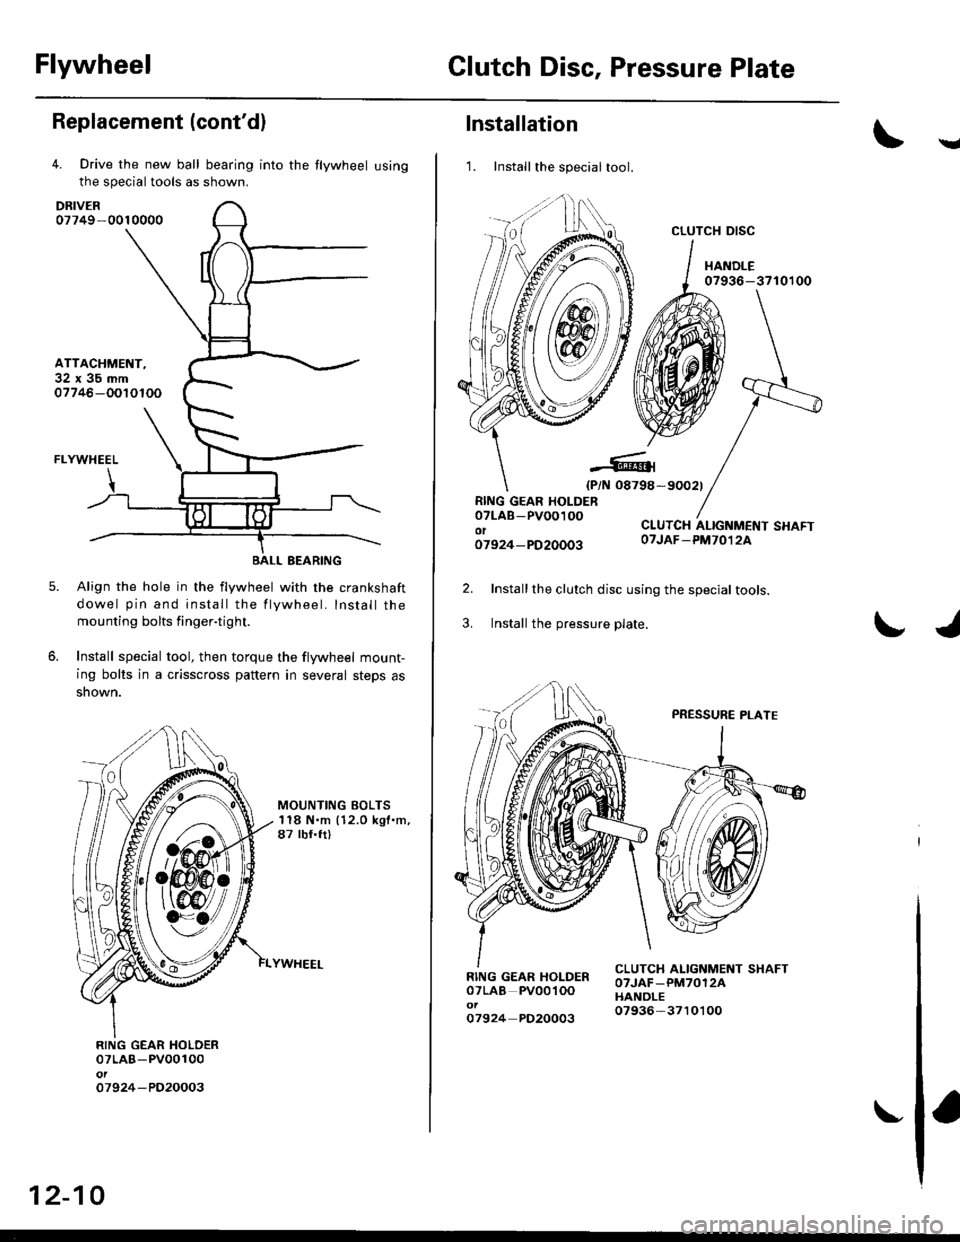 HONDA CIVIC 1997 6.G Owners Guide FlywheelClutch Disc, Pressure Plate
Replacement (contdl
4. Drive the new ball bearing into the flywheel using
the special tools as shown.
DRIVER07749-0010000
ATTACHMENT,32x35mm07746-OOIOTOO
FLYWHEEL
